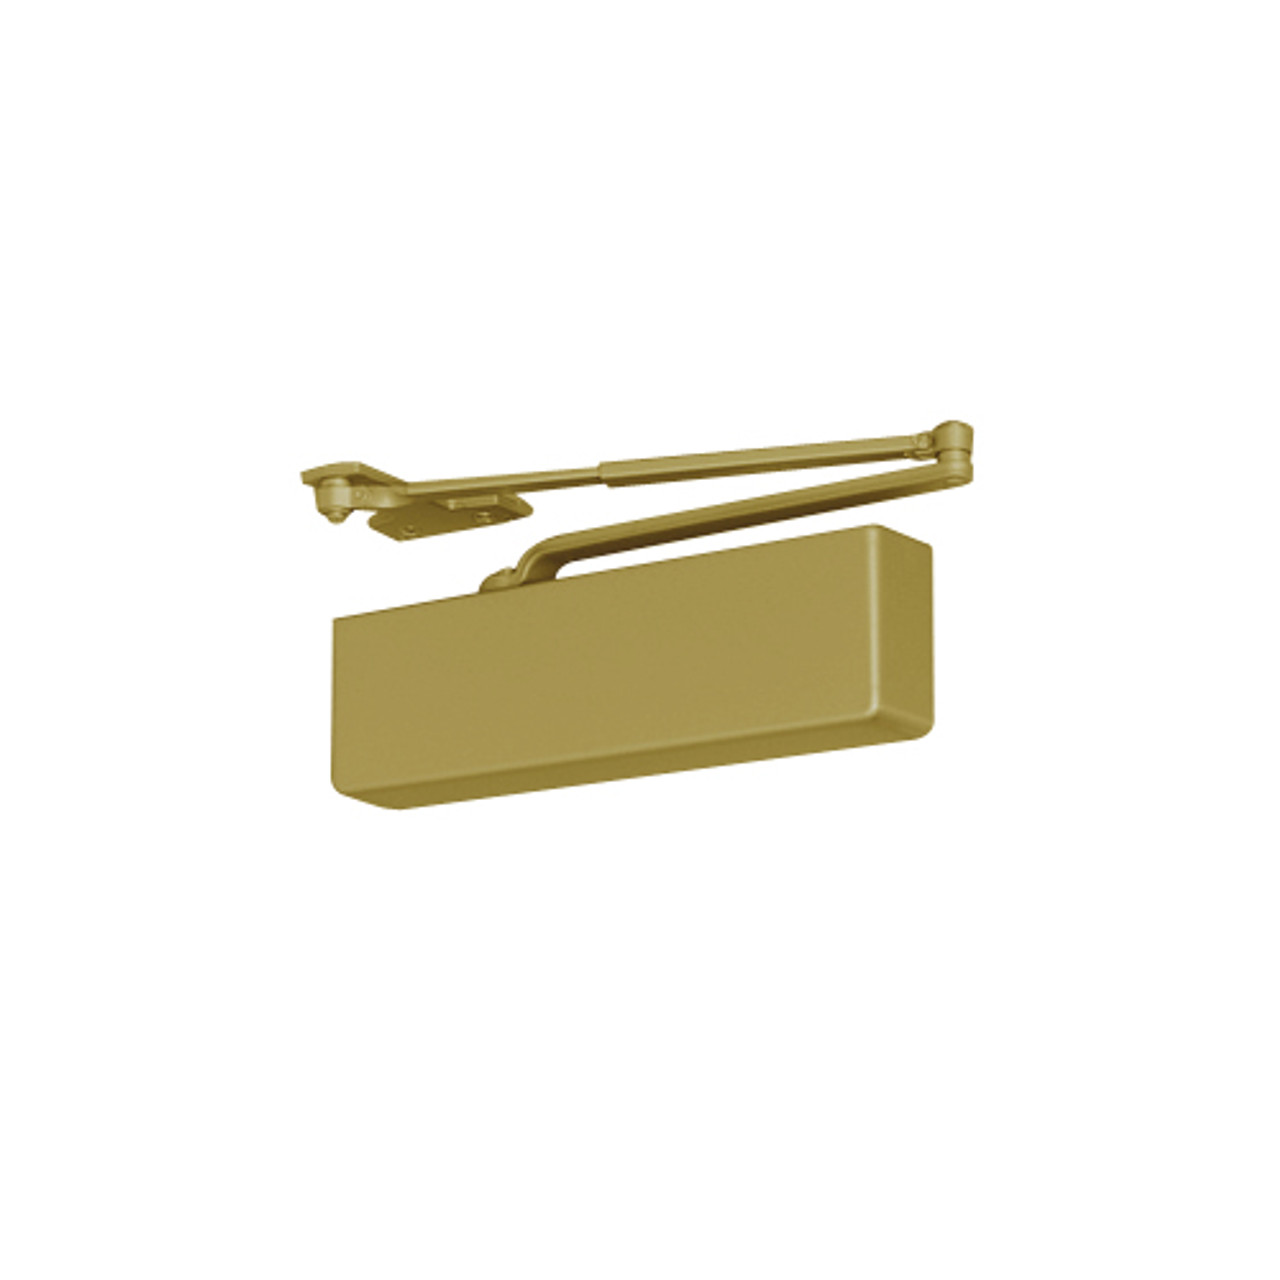 P7500-696 Norton 7500 Series Non-Hold Open Institutional Door Closer with Parallel Arm Application Only in Gold Finish